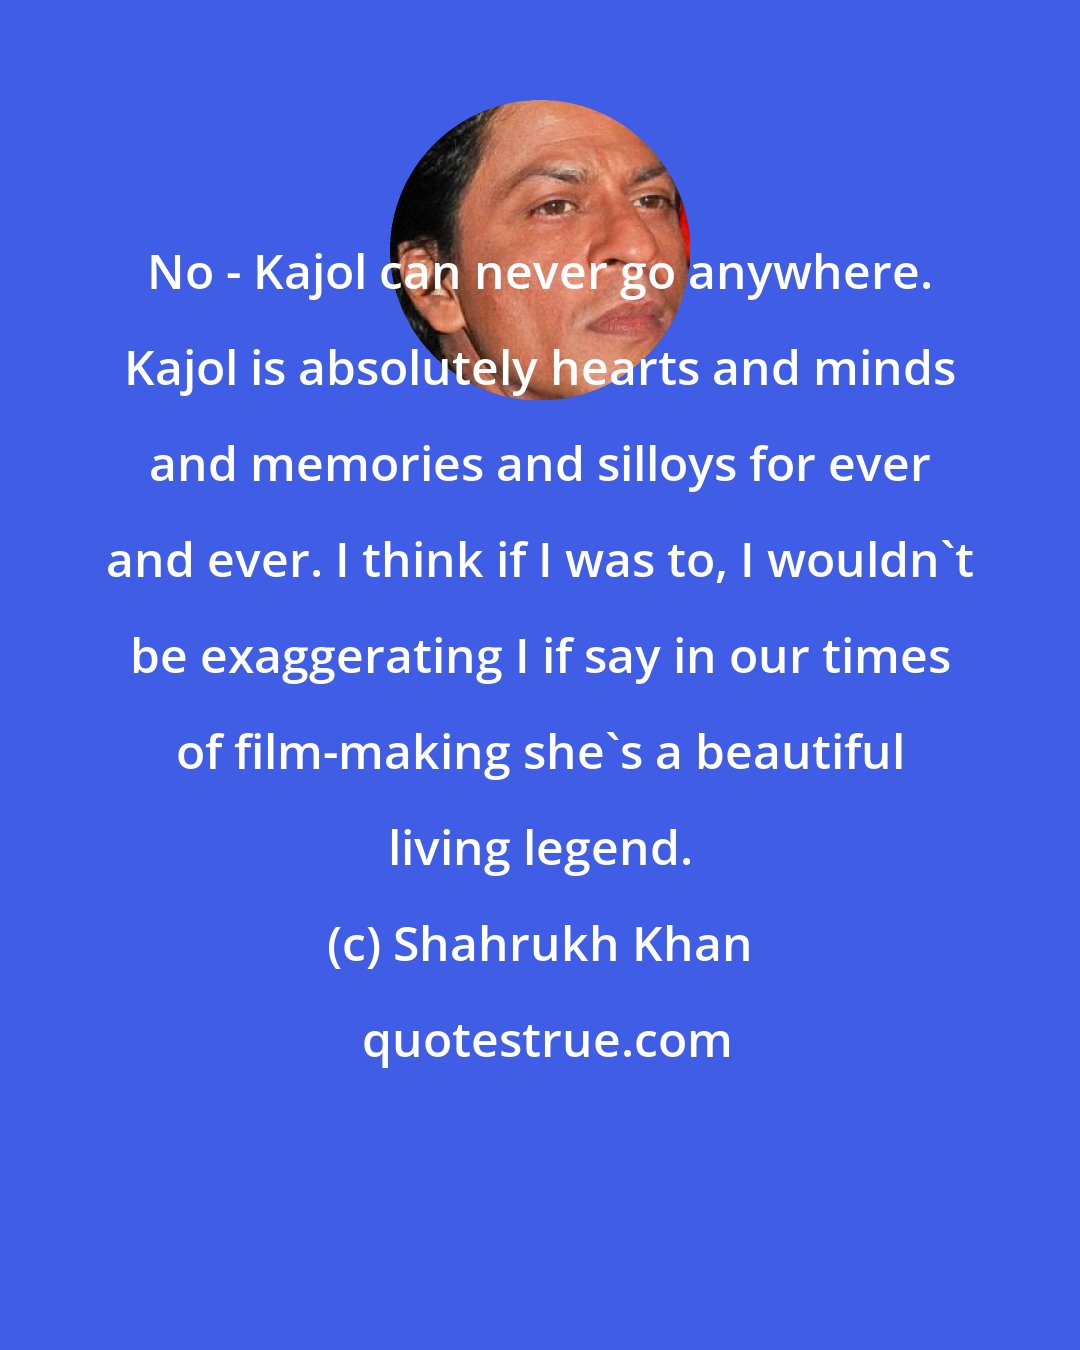 Shahrukh Khan: No - Kajol can never go anywhere. Kajol is absolutely hearts and minds and memories and silloys for ever and ever. I think if I was to, I wouldn't be exaggerating I if say in our times of film-making she's a beautiful living legend.